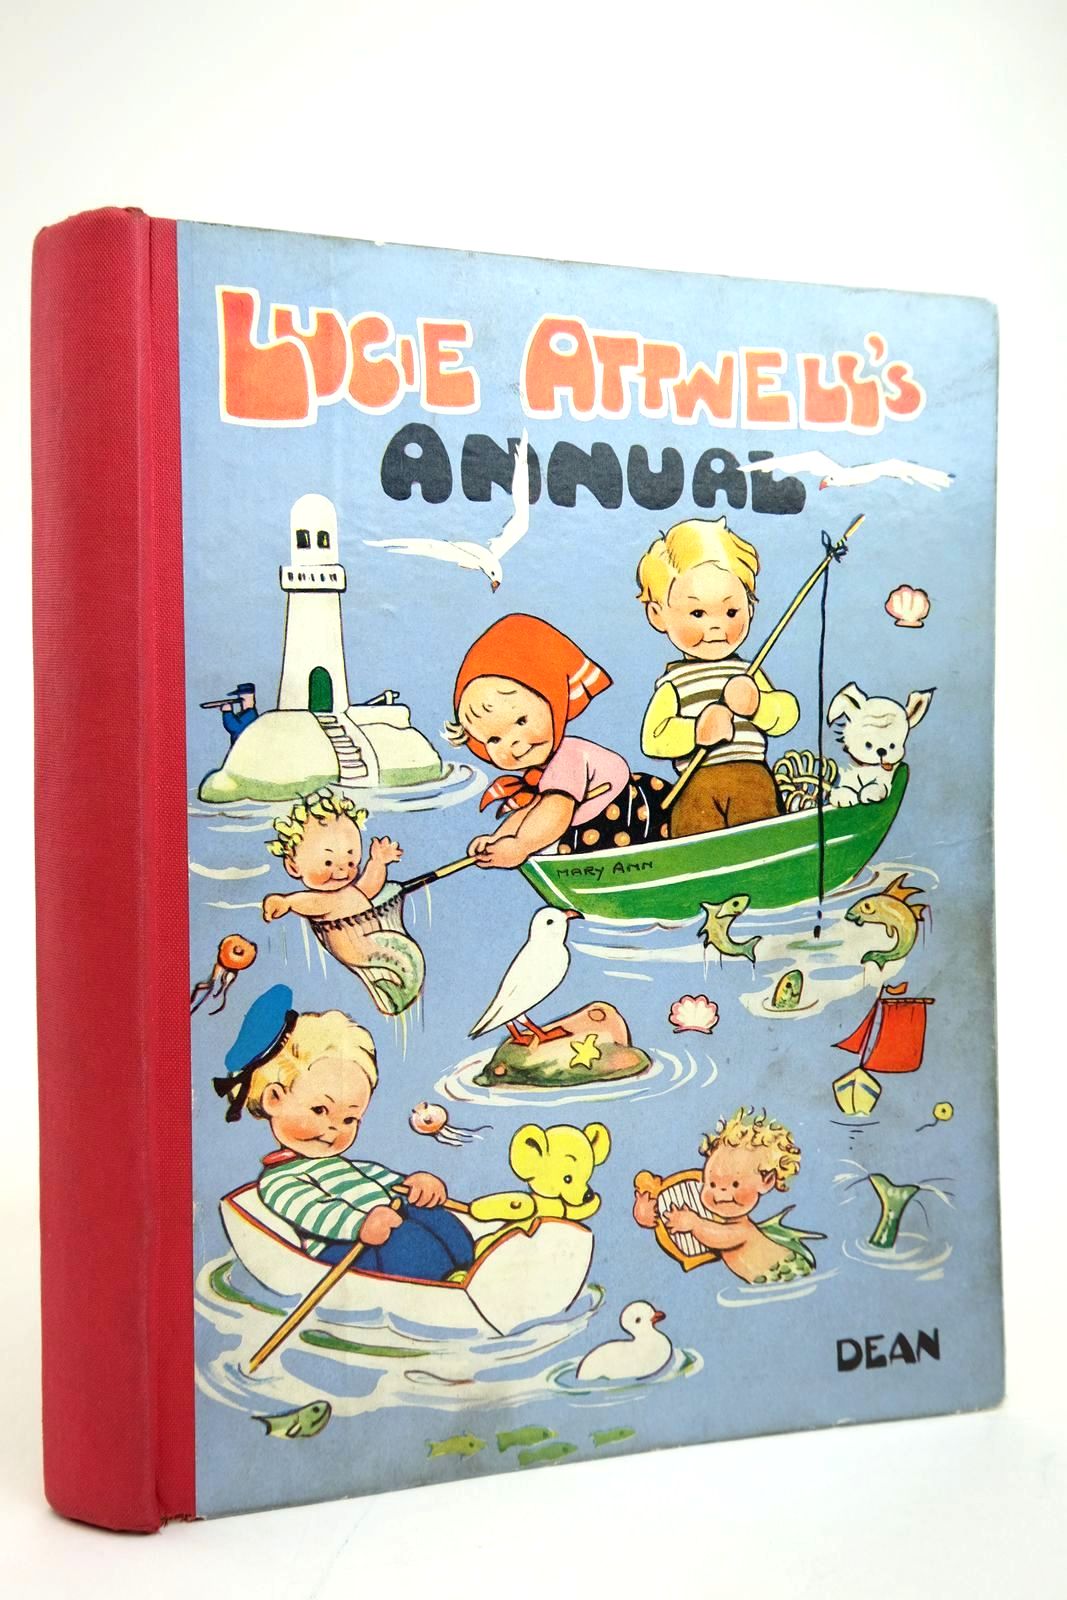 Photo of LUCIE ATTWELL'S ANNUAL 1944 written by Attwell, Mabel Lucie illustrated by Attwell, Mabel Lucie published by Dean &amp; Son Ltd. (STOCK CODE: 2135056)  for sale by Stella & Rose's Books